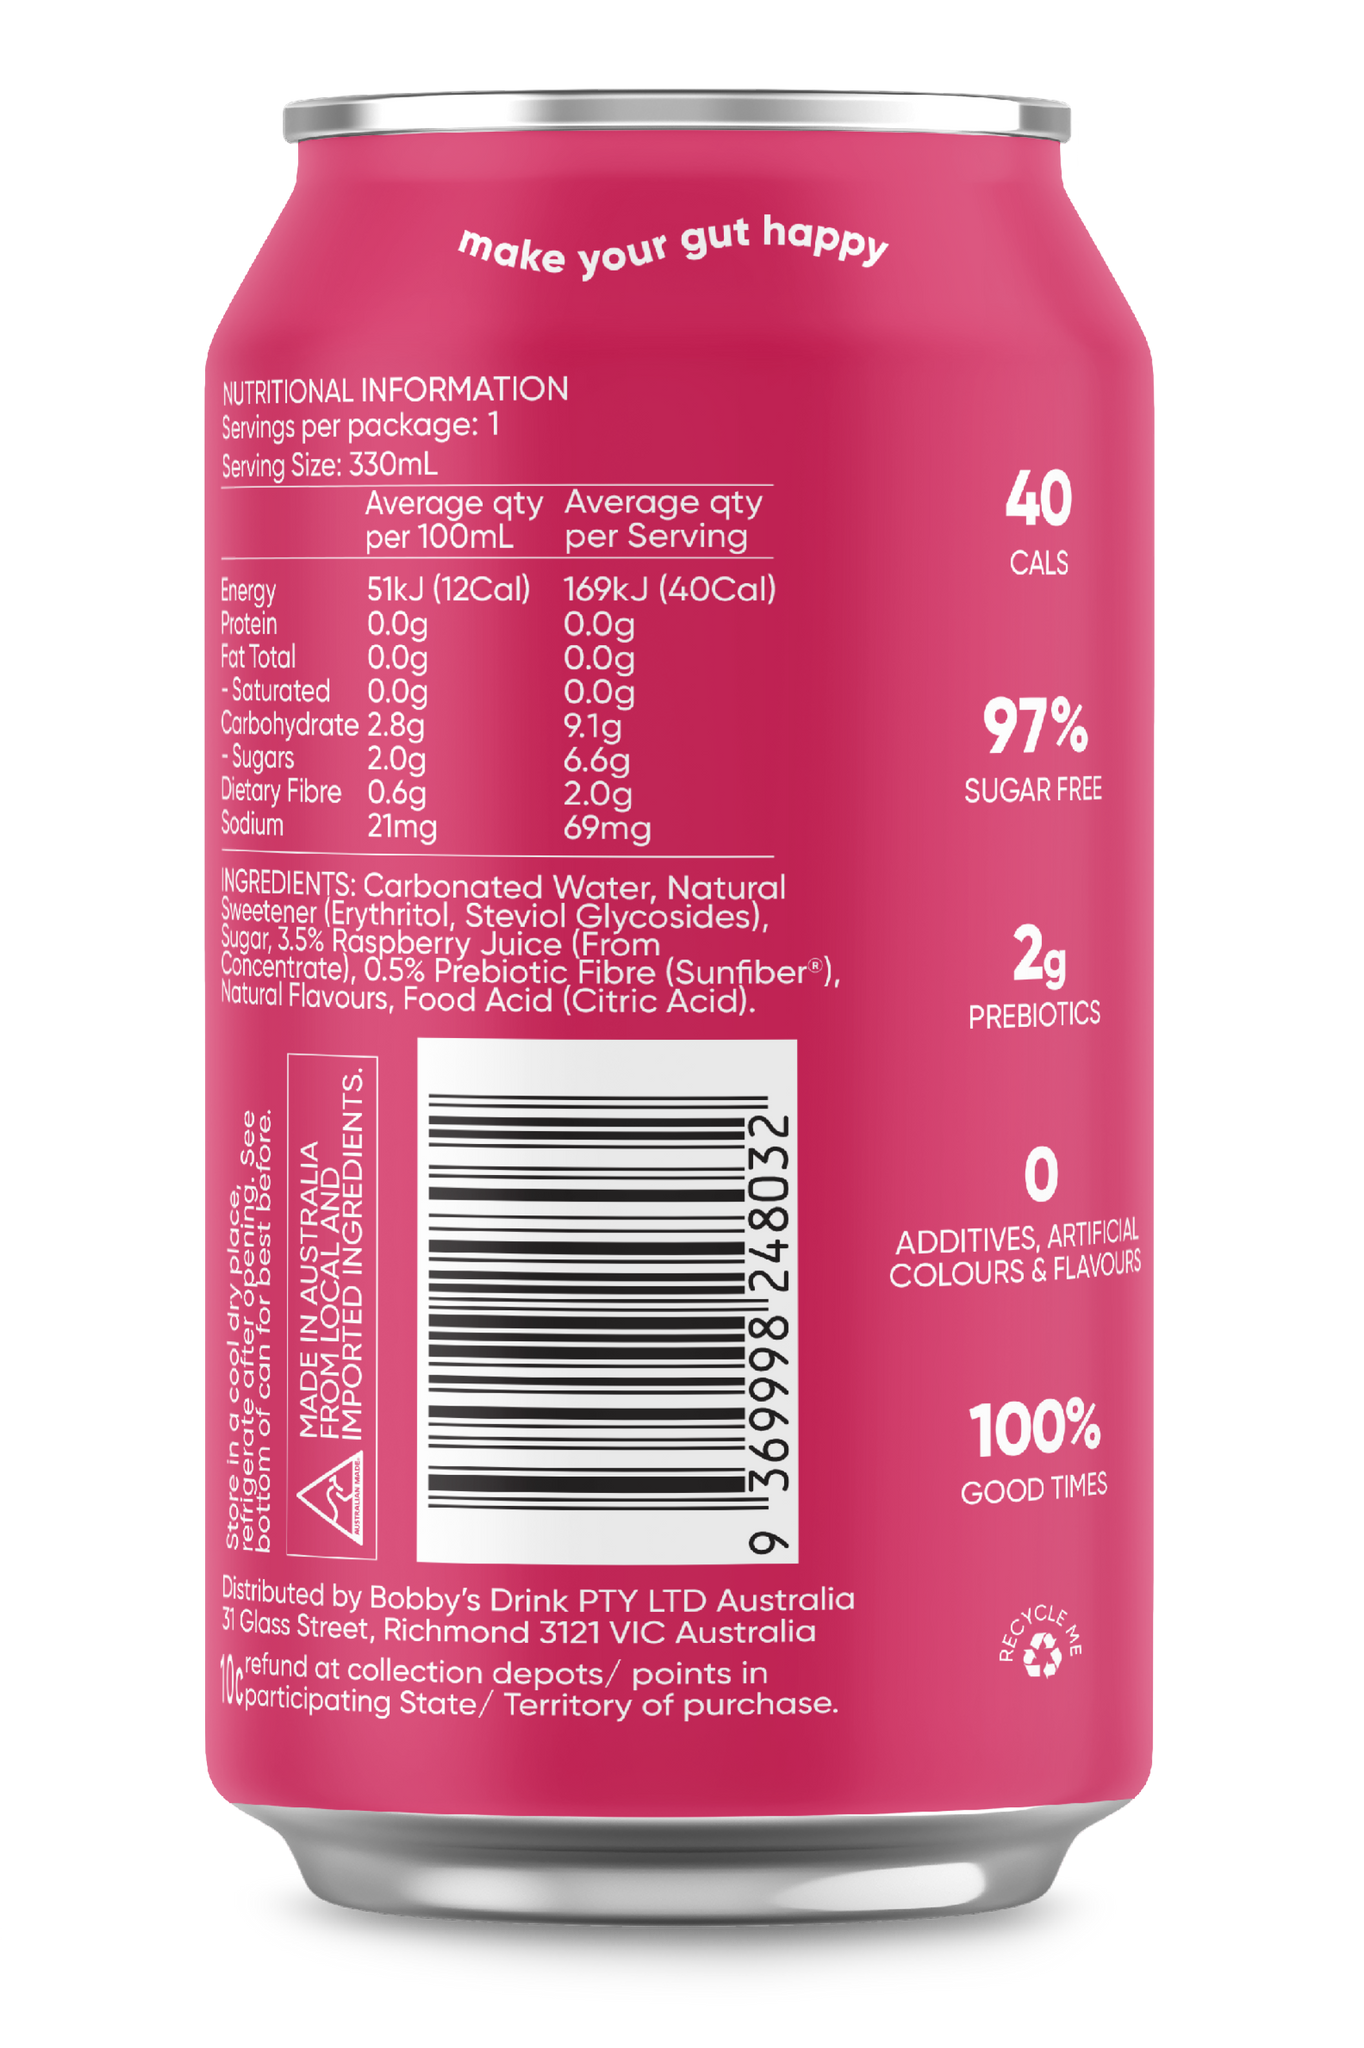 side view of Bobby's prebiotic soda showing nutritional information